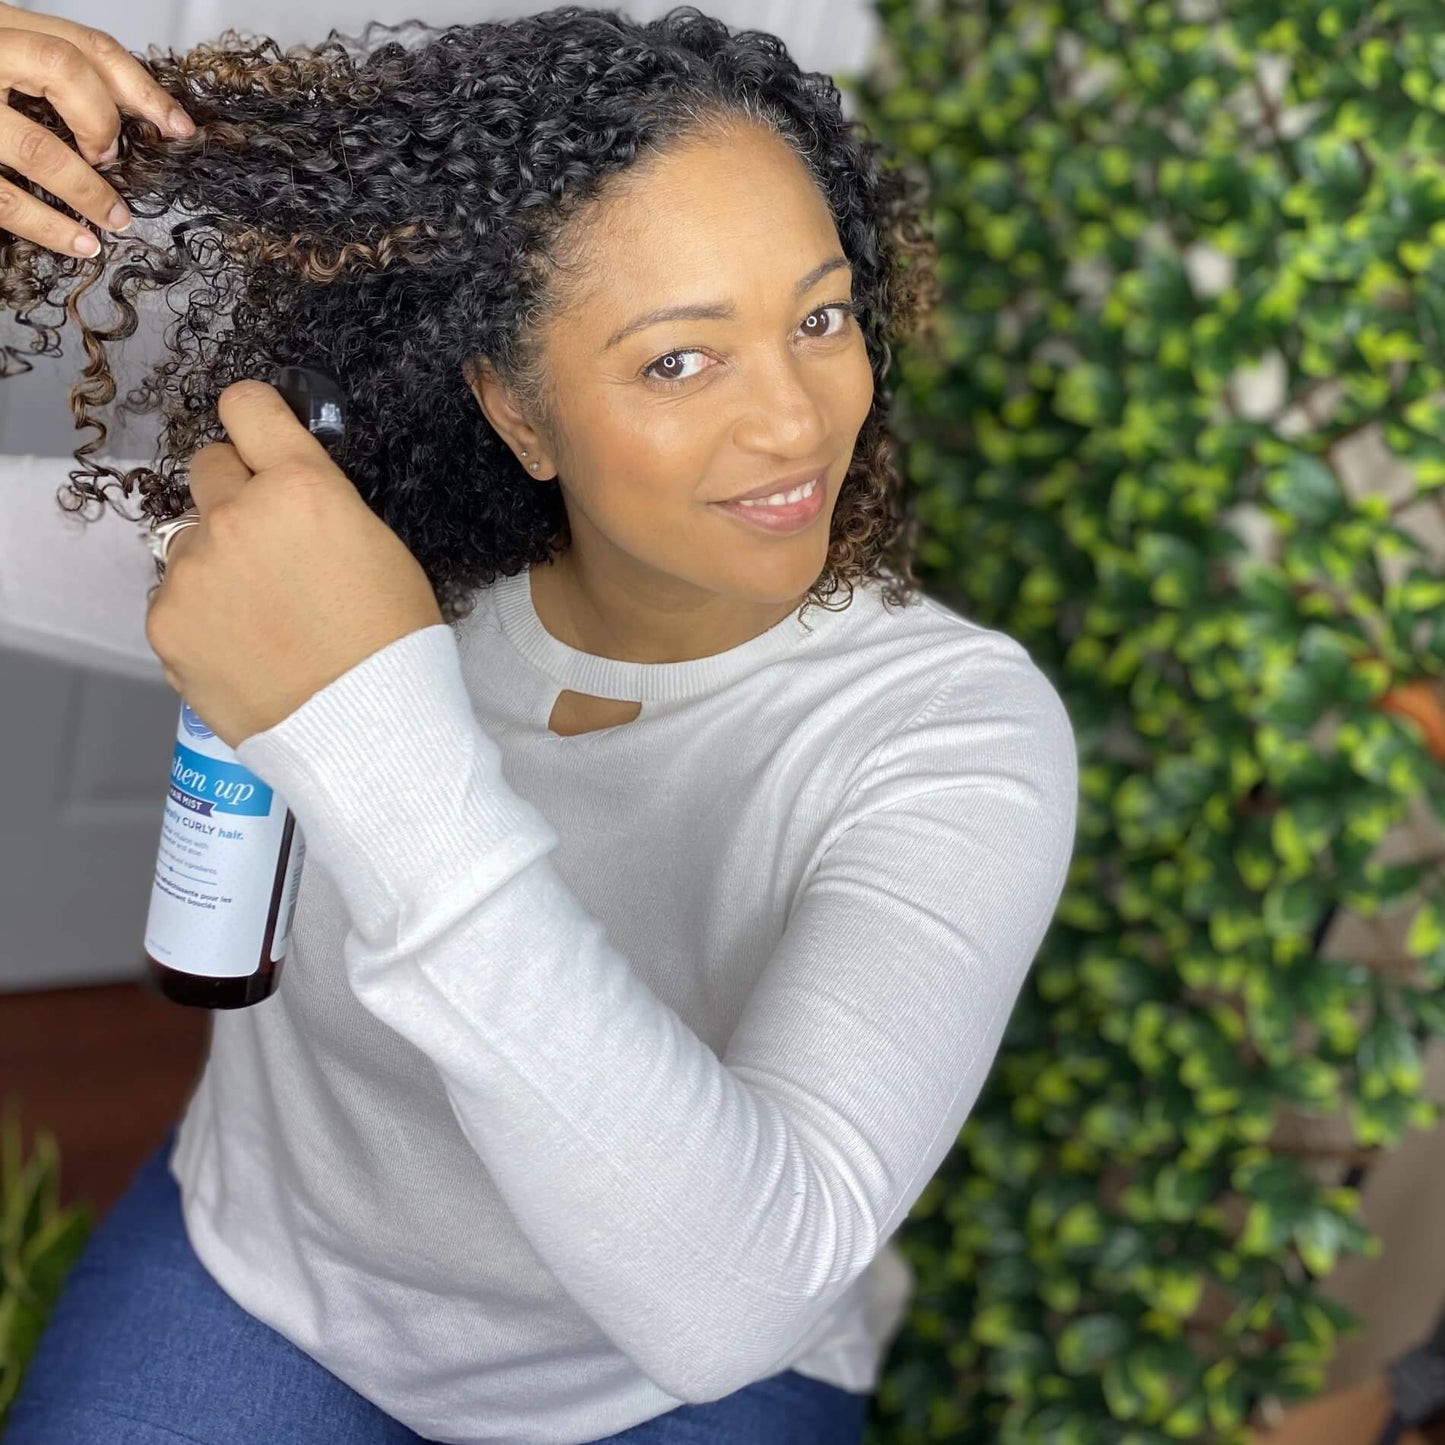 Women with naturally curly hair sectioning her hair and spraying freshen up hair mist